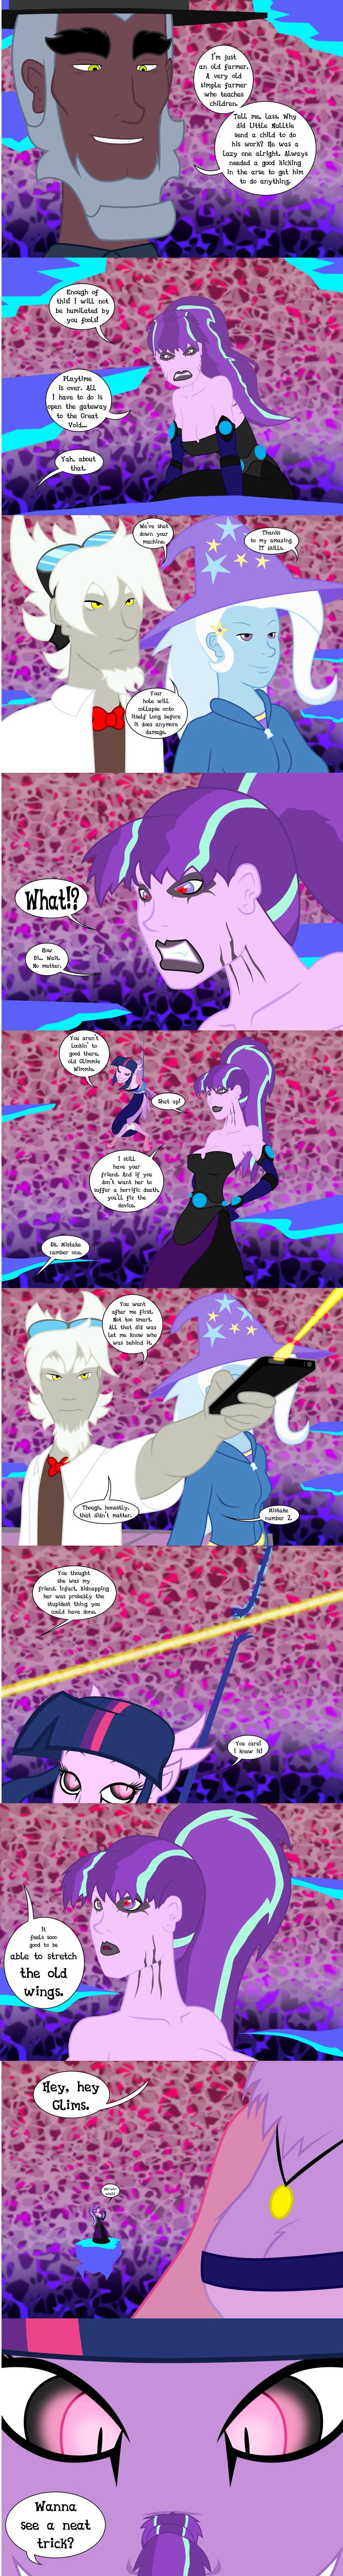 Page 24 - Part 9